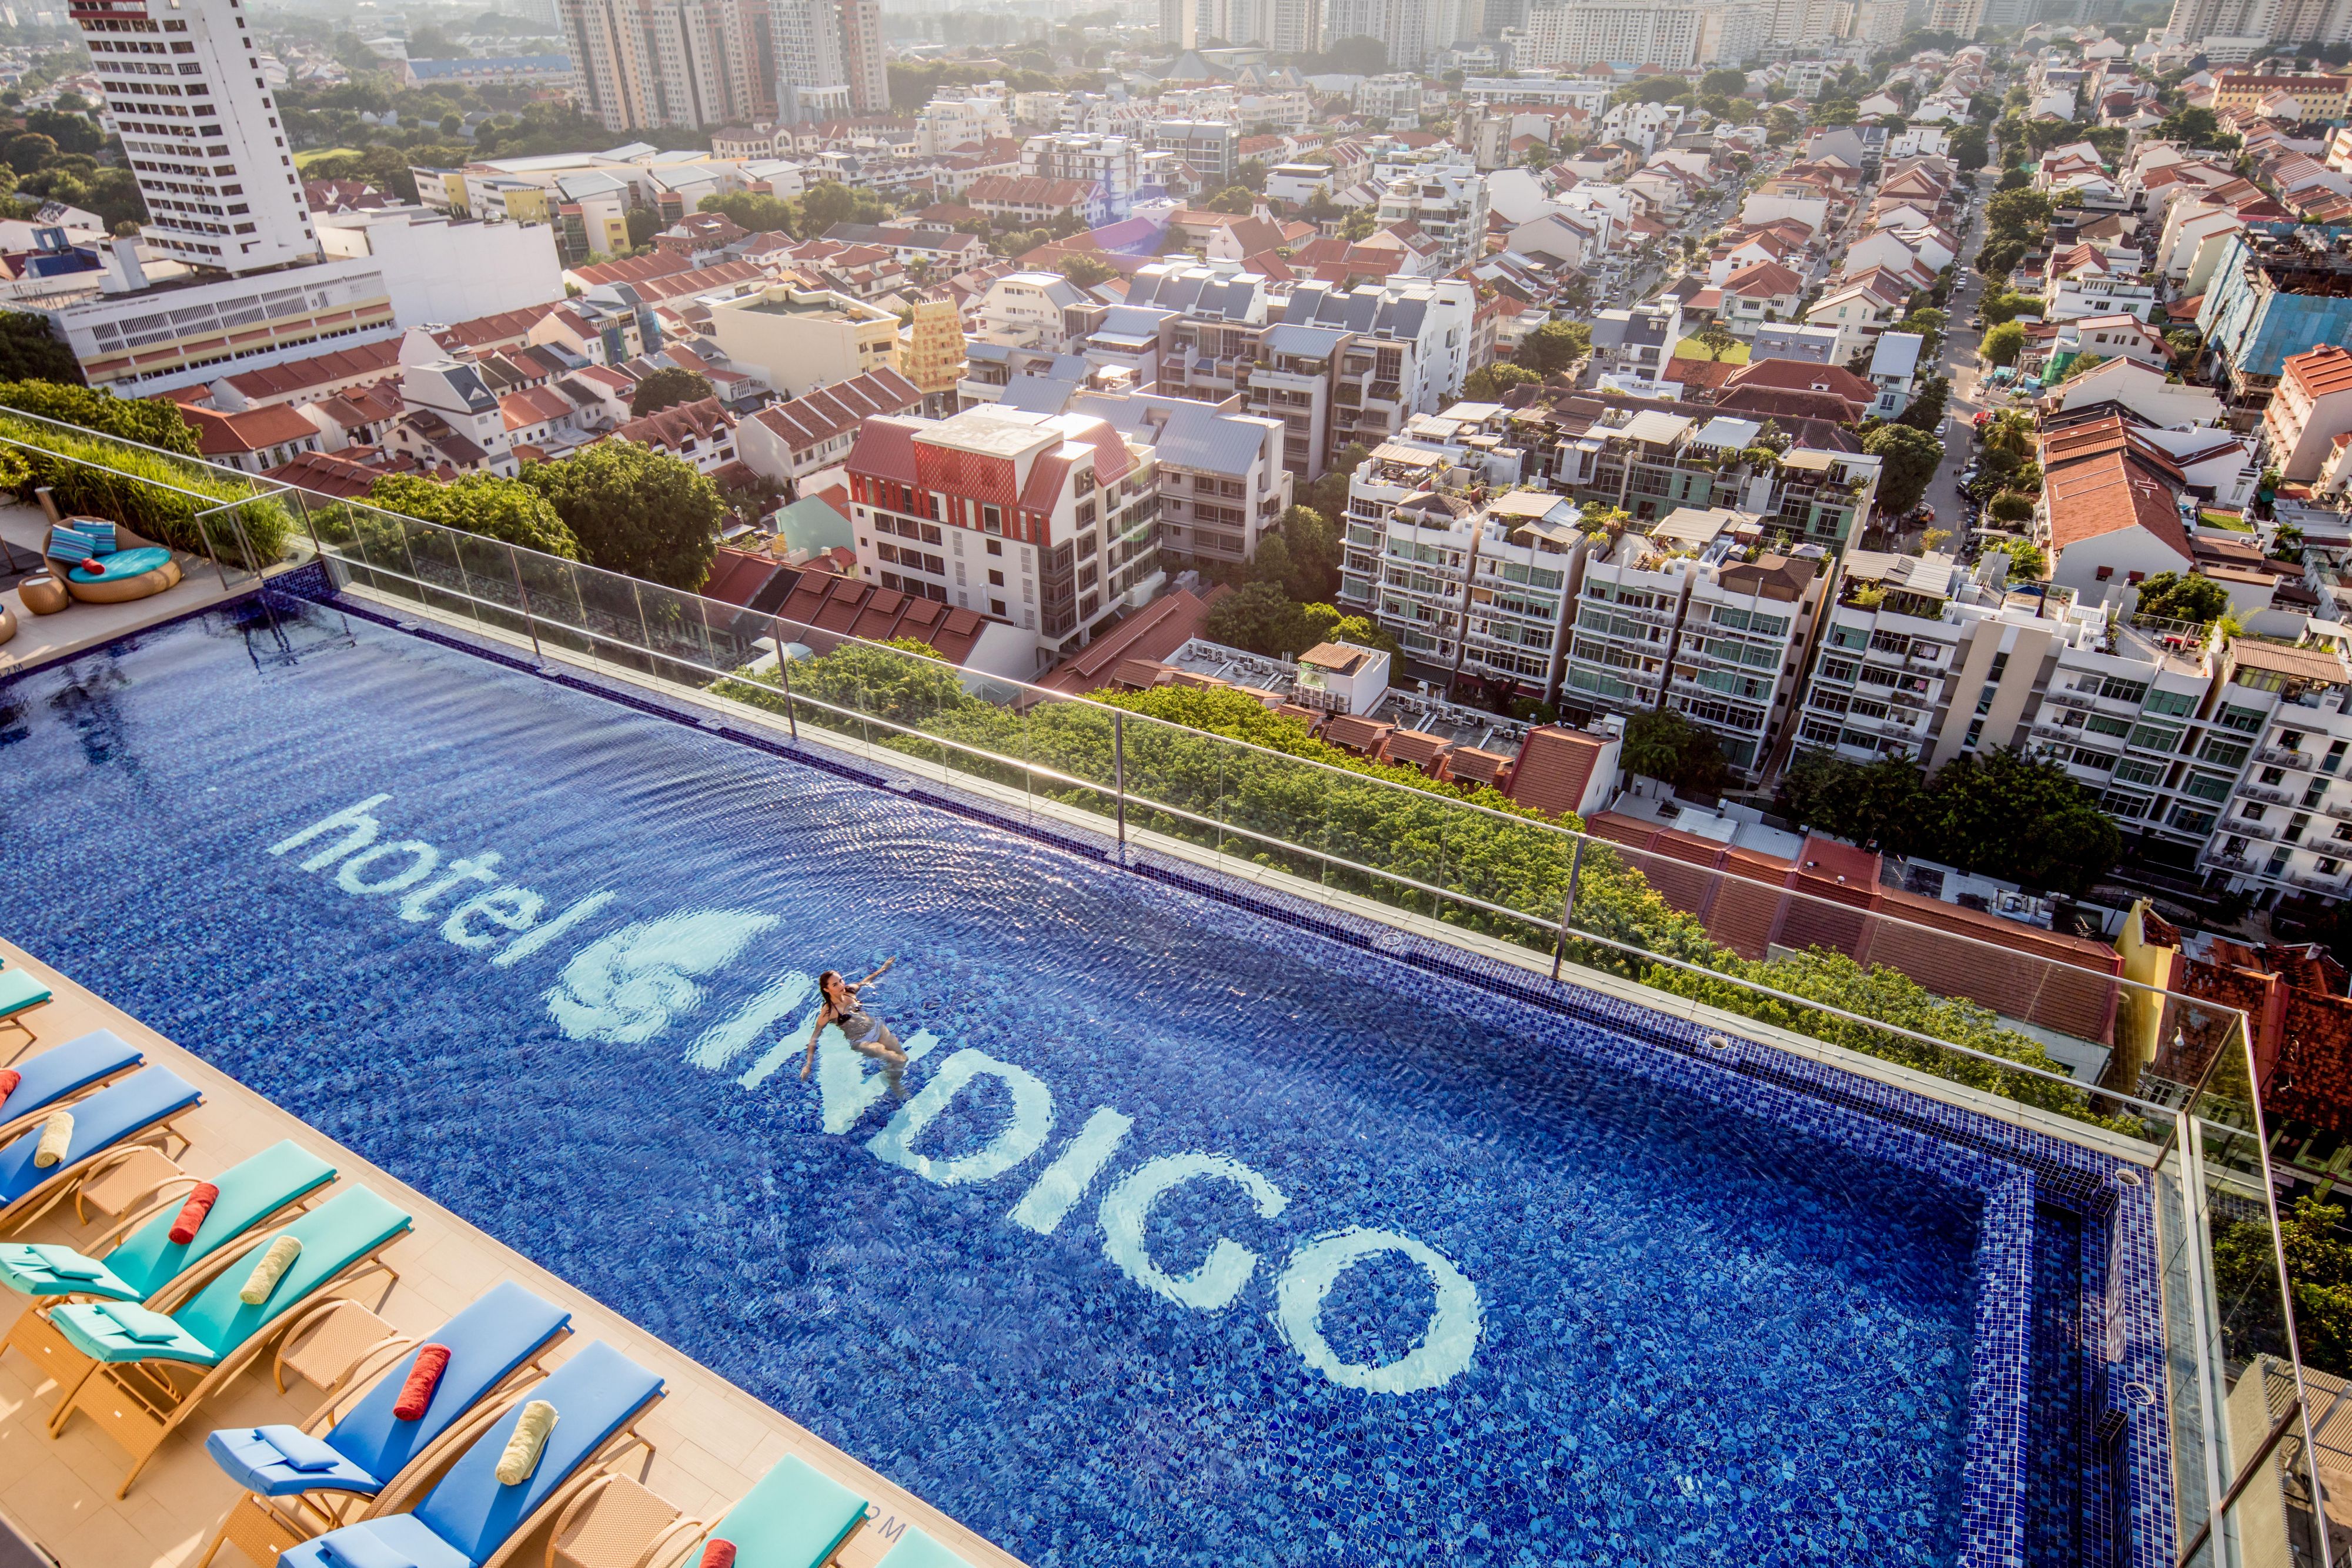 Be surprised by the view that awaits you from our rooftop infinity pool that overlooks our vibrant neighbourhood. One can enjoy the unblocked view from our infinity pool due to the Urban Redevelopment Authority's (URA) guidelines that require conservation housing in Katong/Joo Chiat to be not higher than 5 storeys.